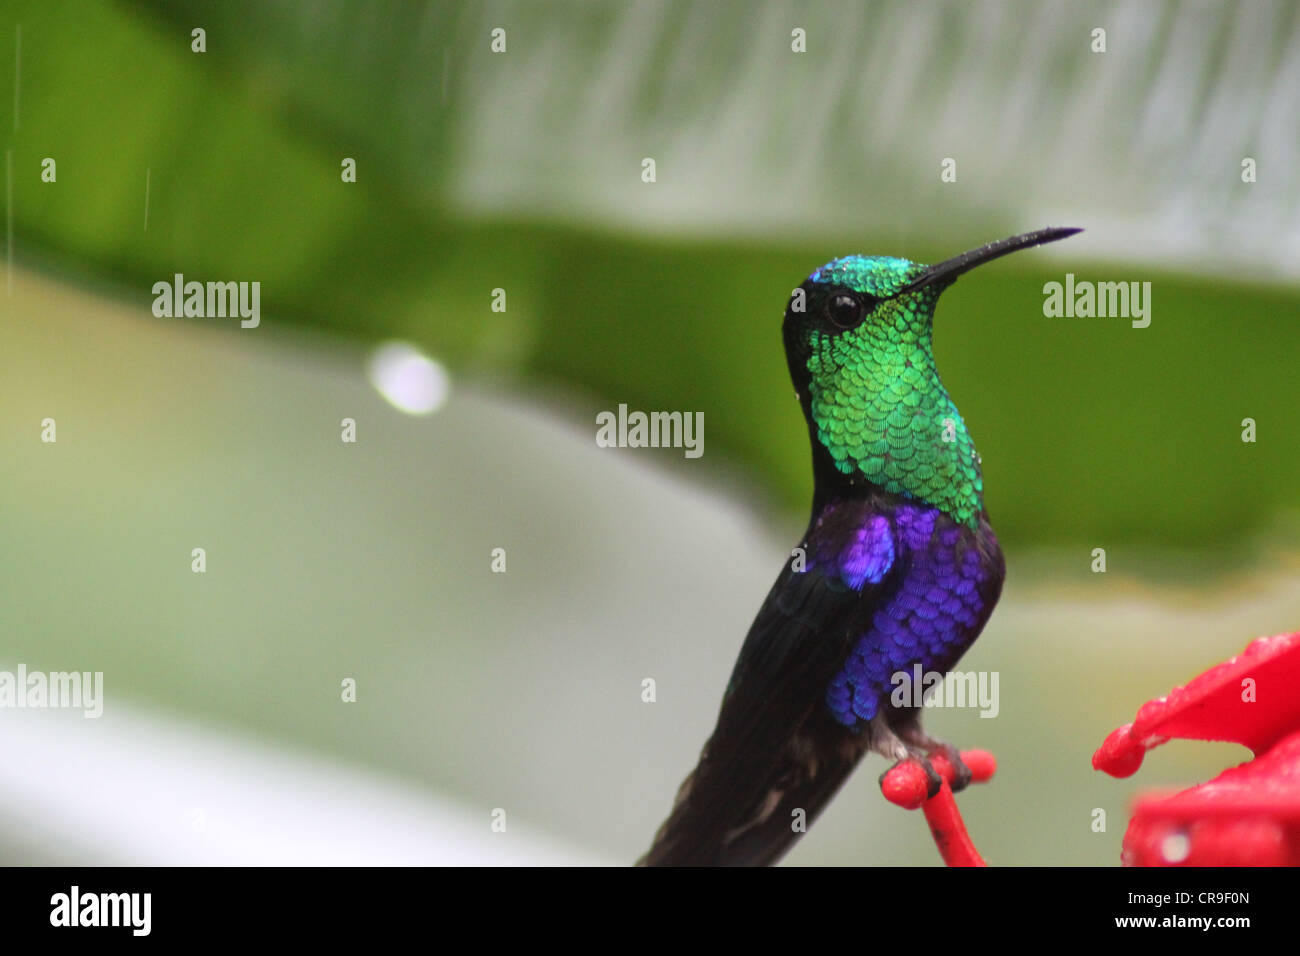 Vivid green and blue humming bird on red perch Stock Photo